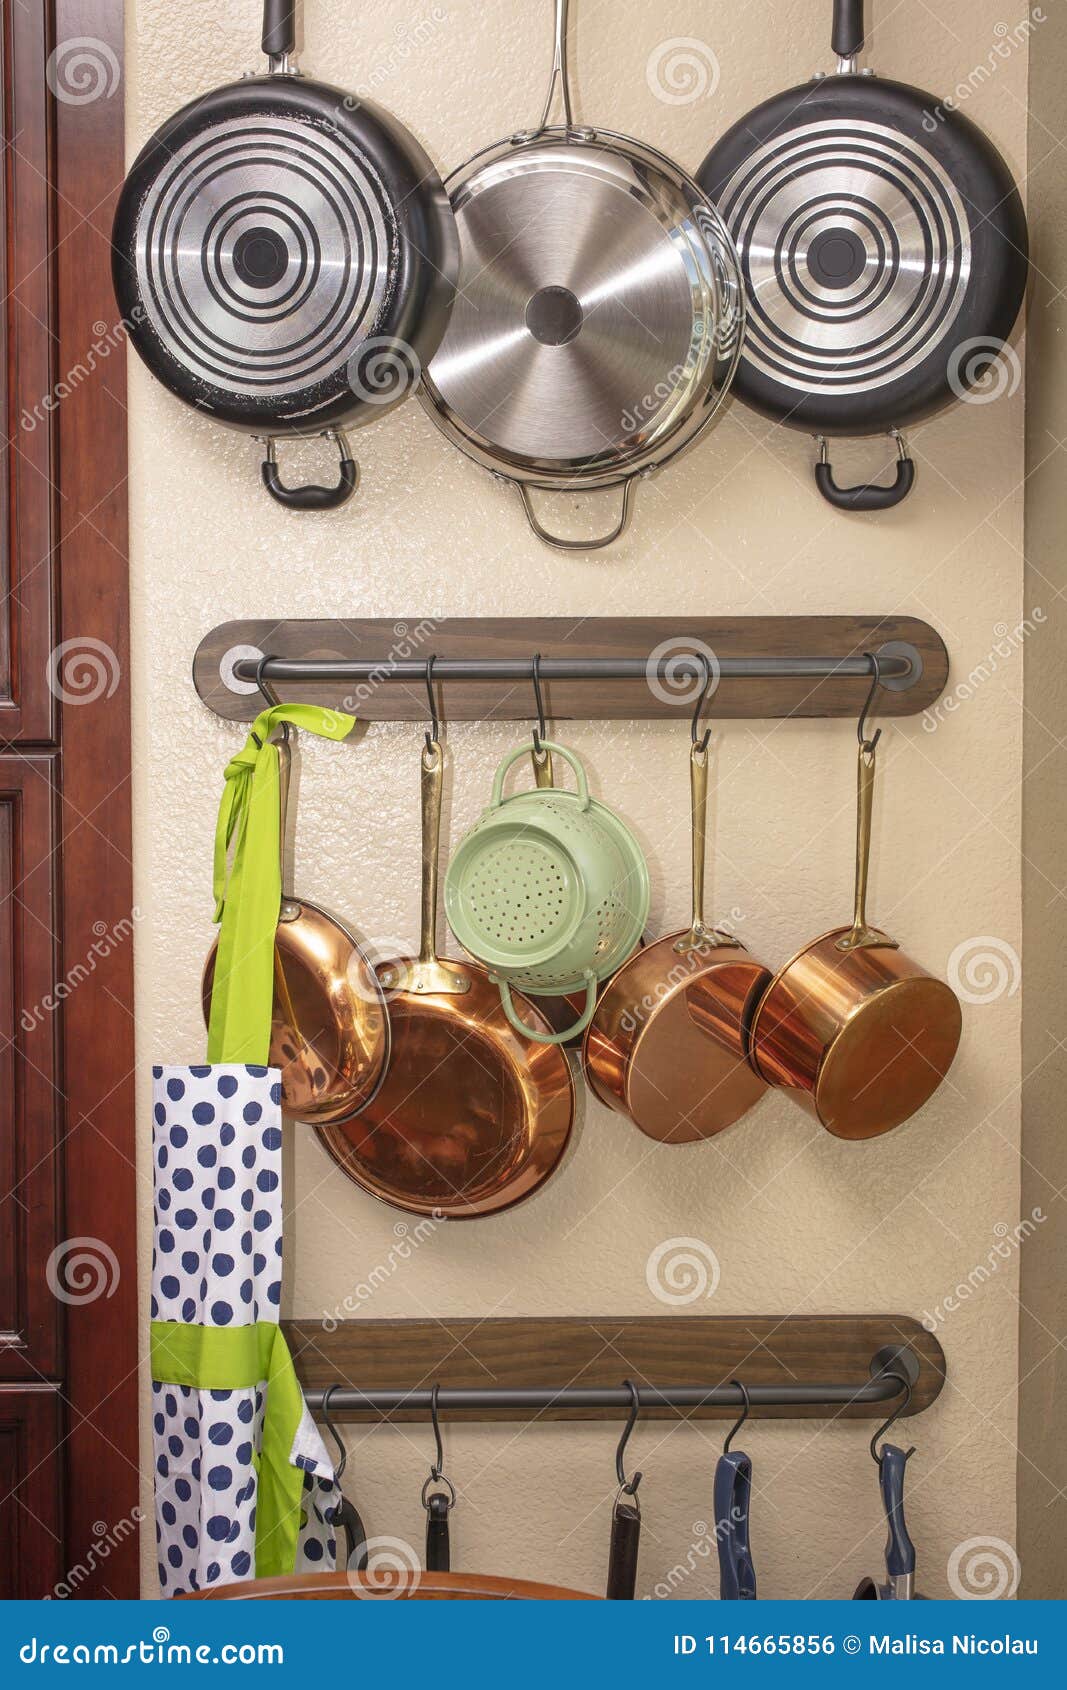 https://thumbs.dreamstime.com/z/pots-pans-hanging-kitchen-wall-hooks-to-save-space-pots-pans-hanging-kitchen-wall-to-save-space-114665856.jpg